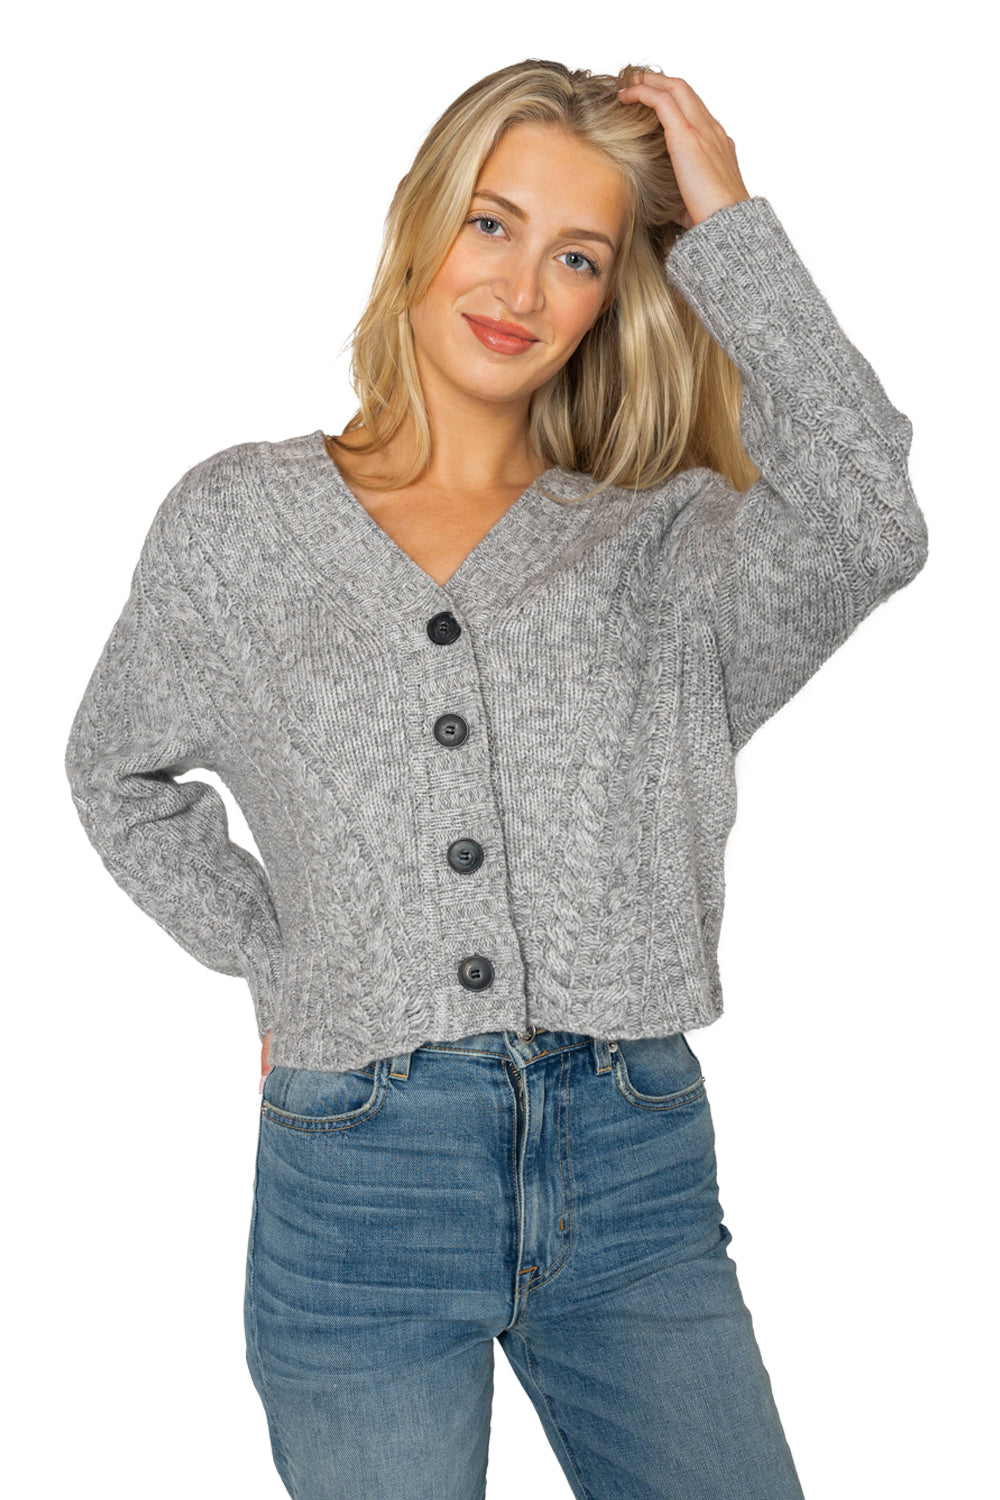 Wool Cashmere Marled Cable Cardigan - Frost Gray